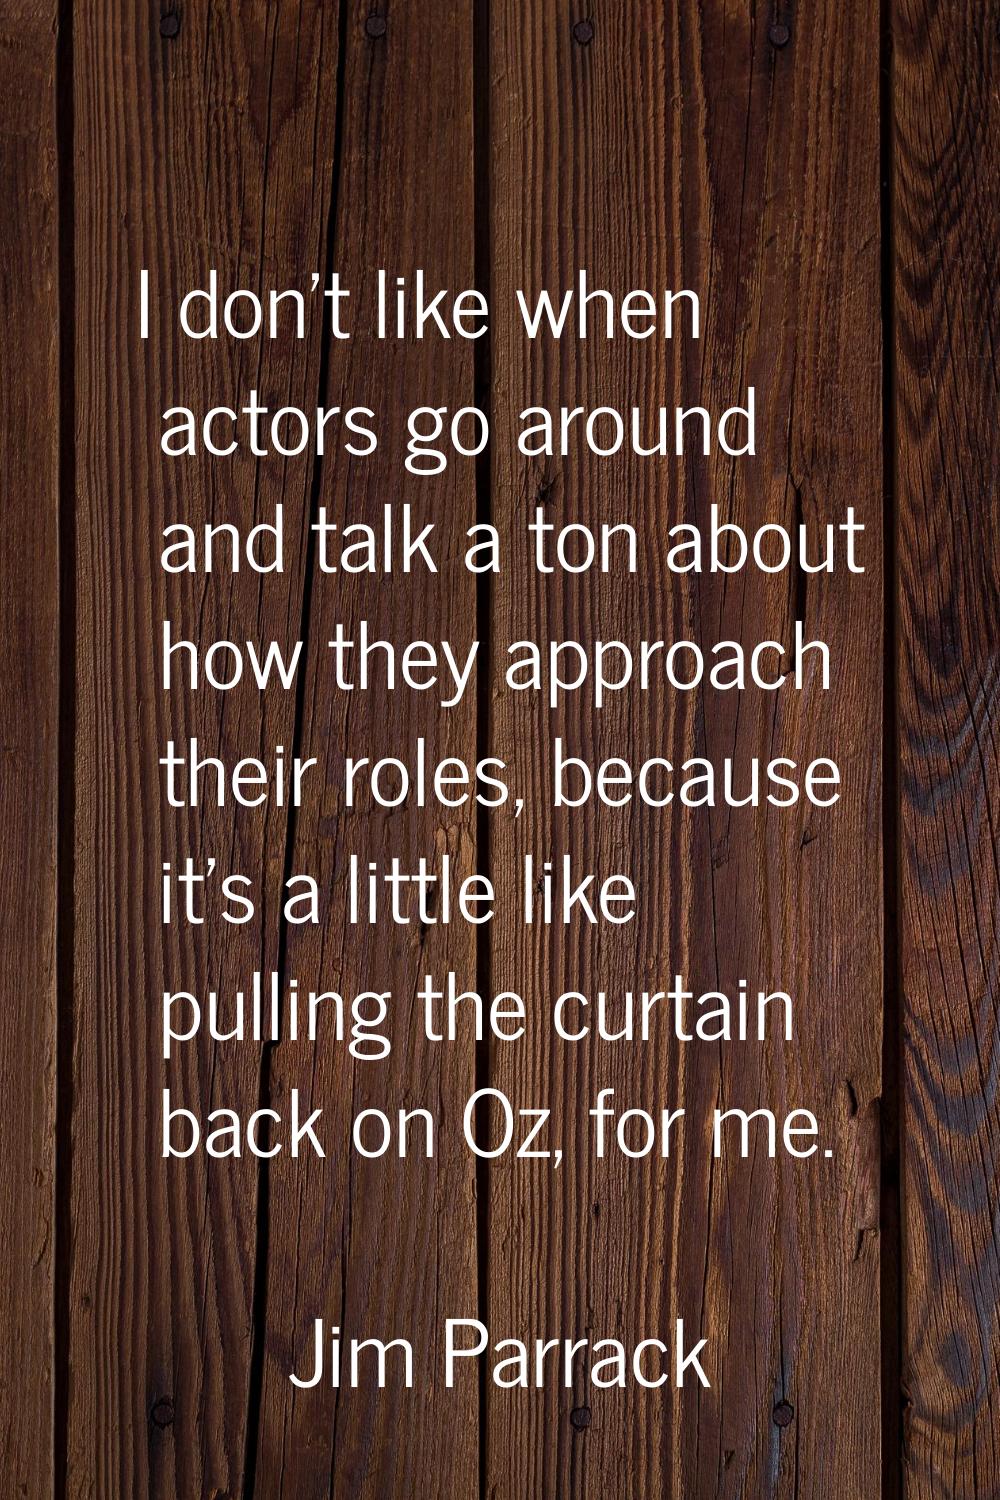 I don't like when actors go around and talk a ton about how they approach their roles, because it's